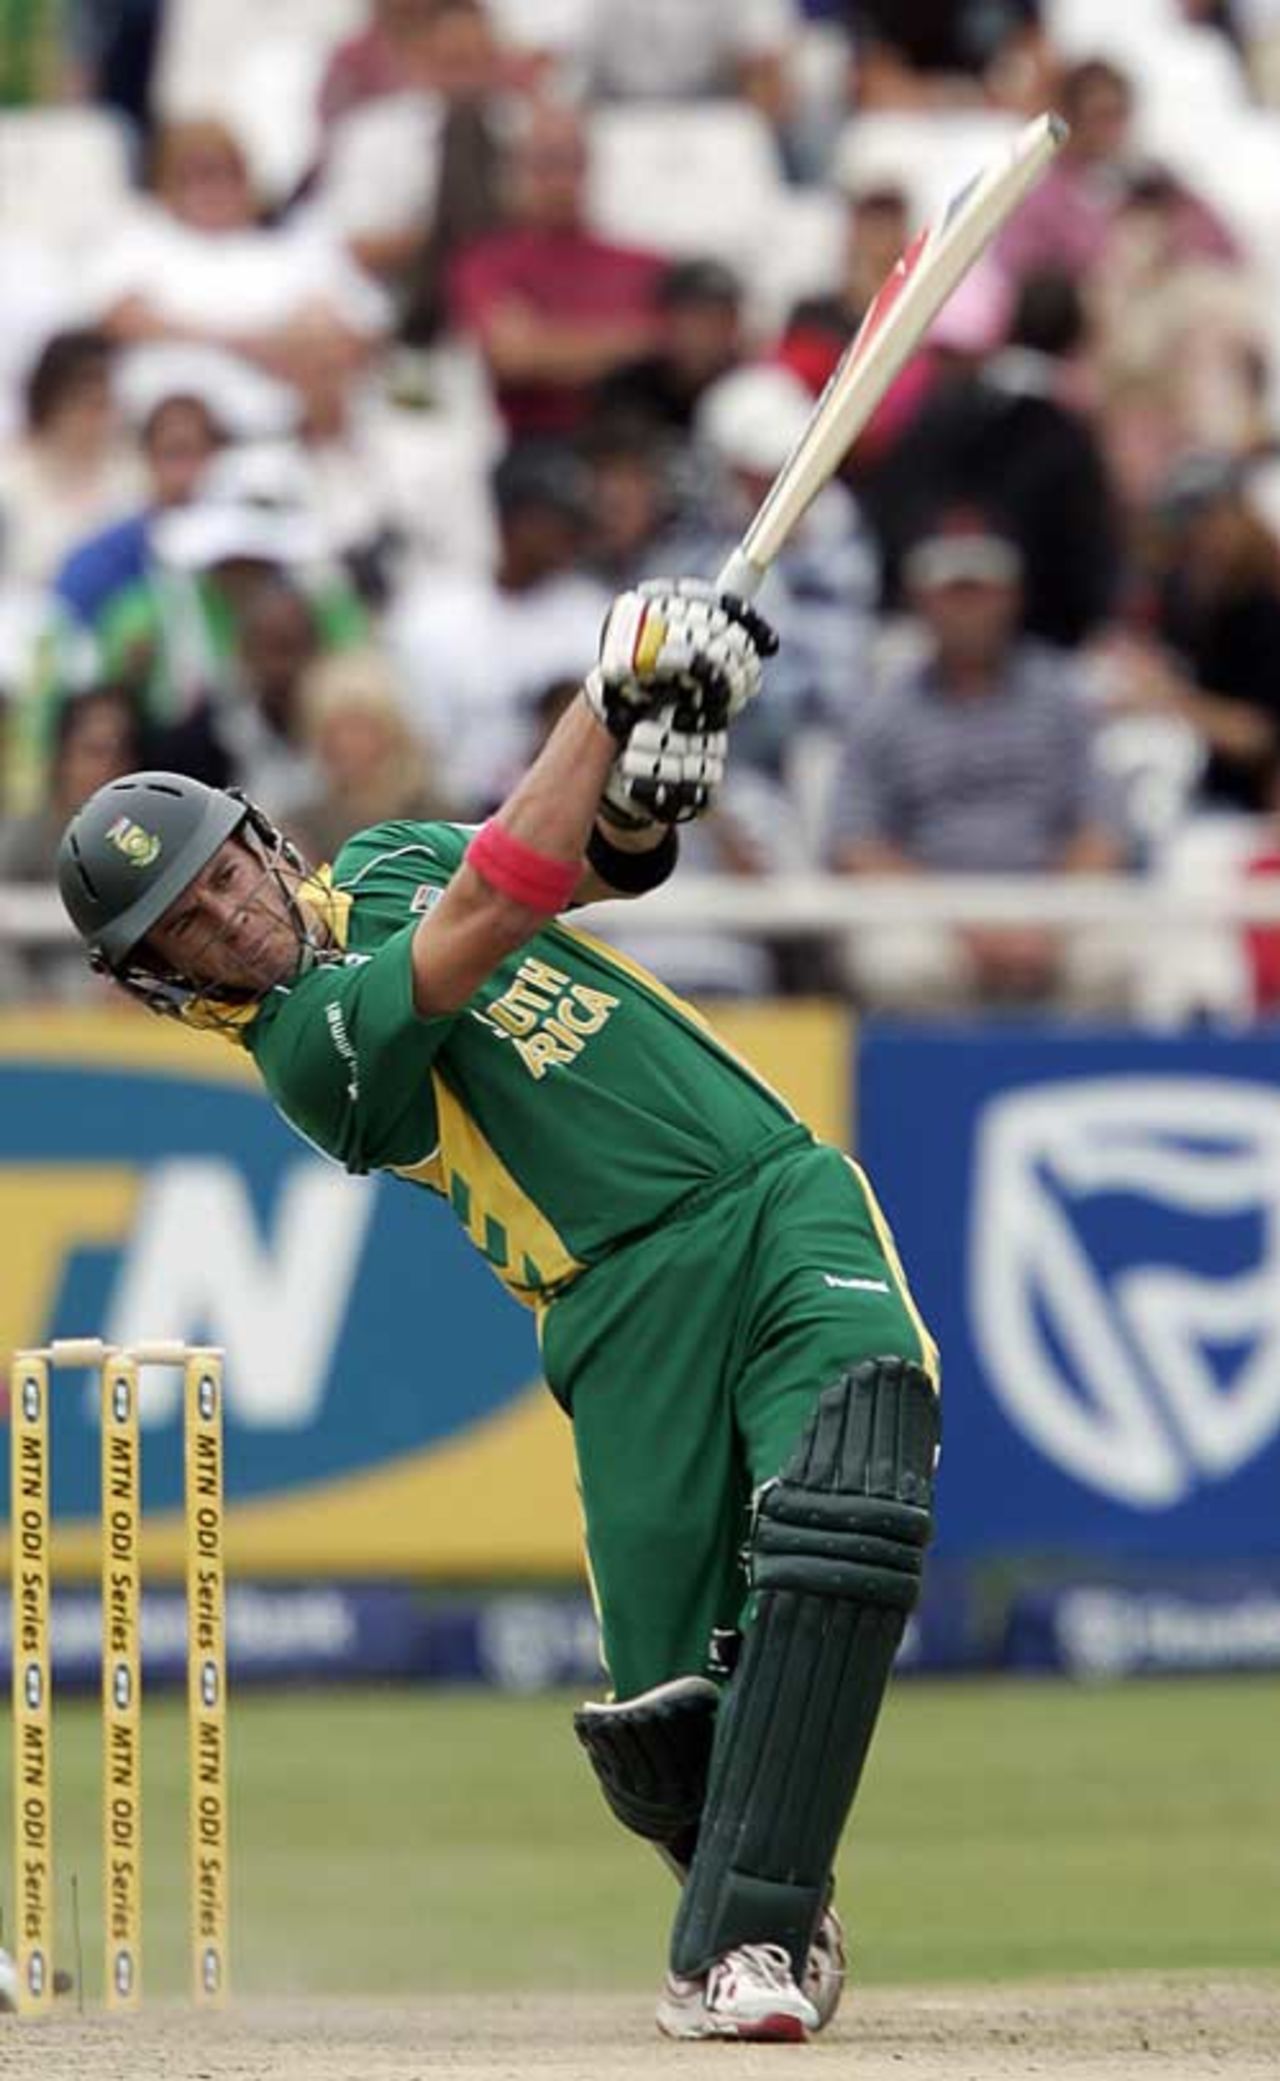 AB de Villiers almost swings himself off his feet as South Africa race to victory, South Africa v Pakistan, 4th ODI, Cape Town, February 11, 2007